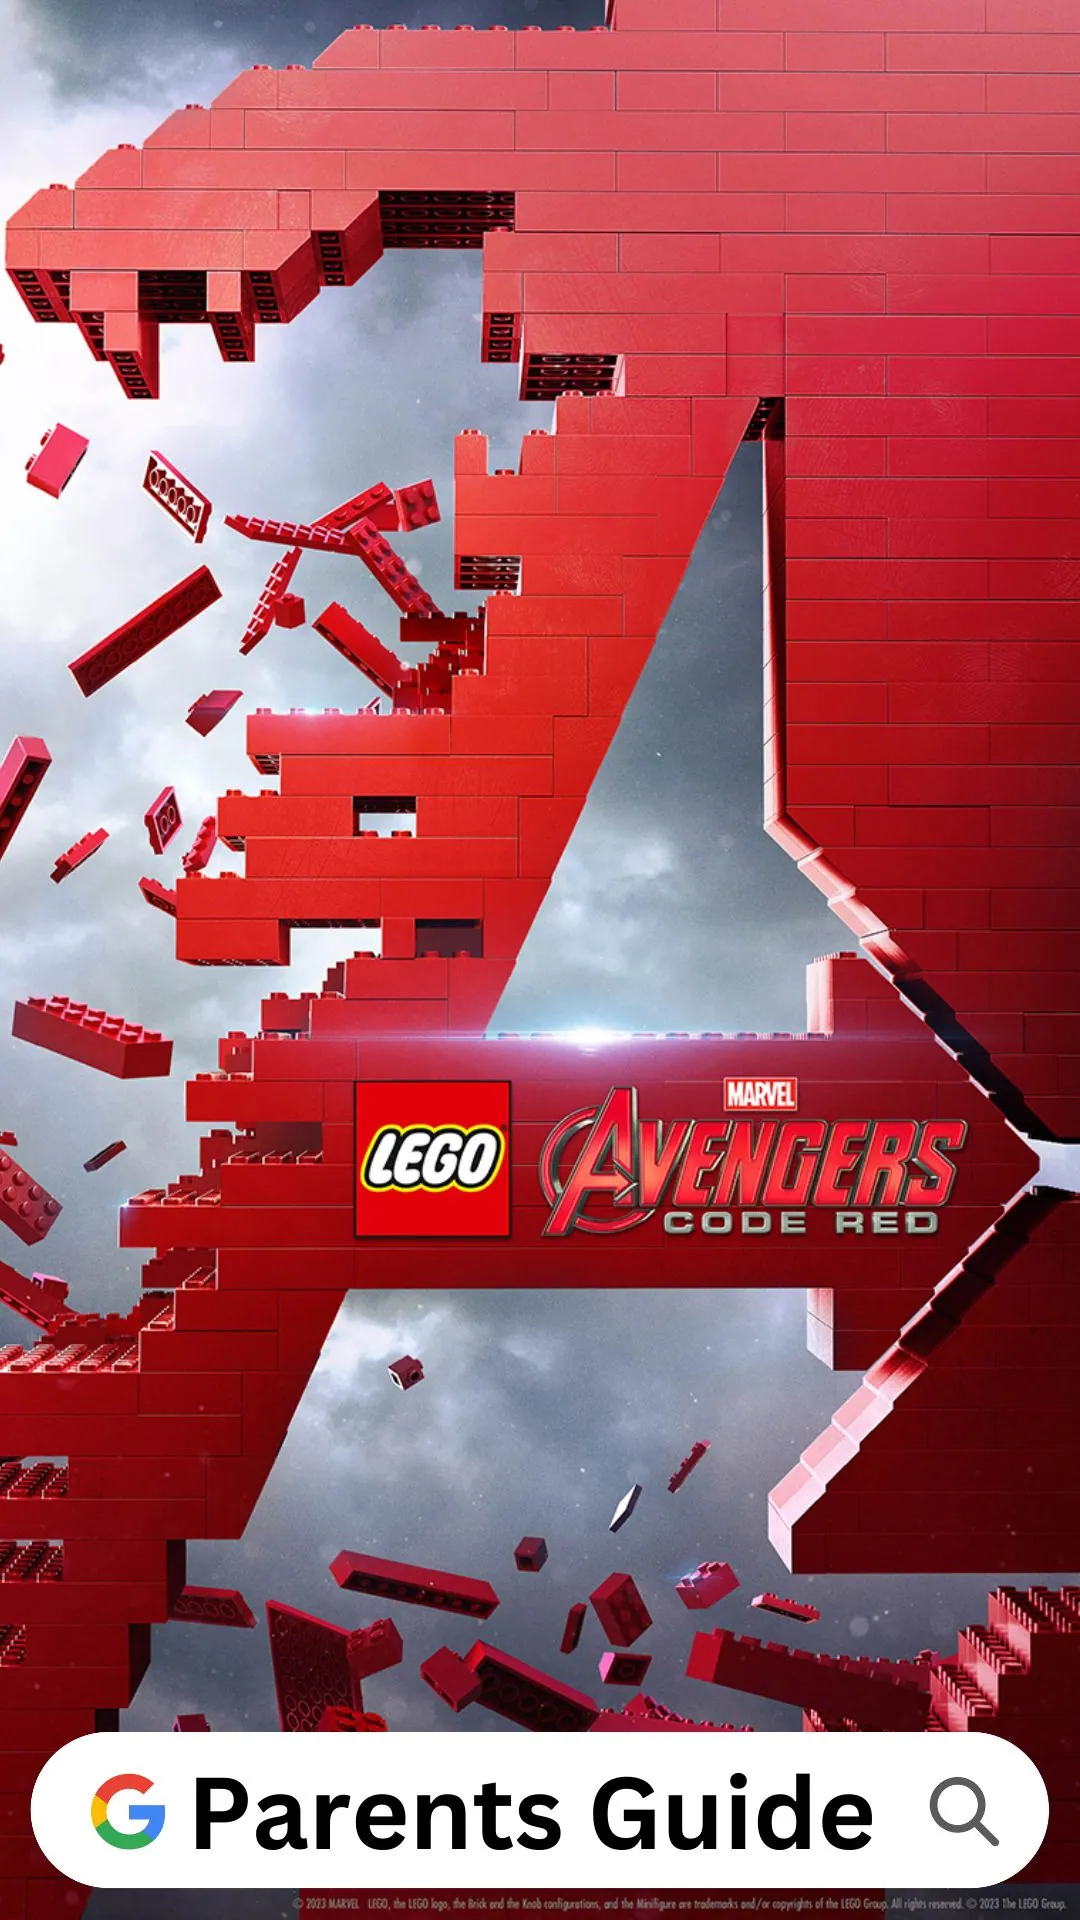 Lego Marvel Avengers: Code Red Parents Guide